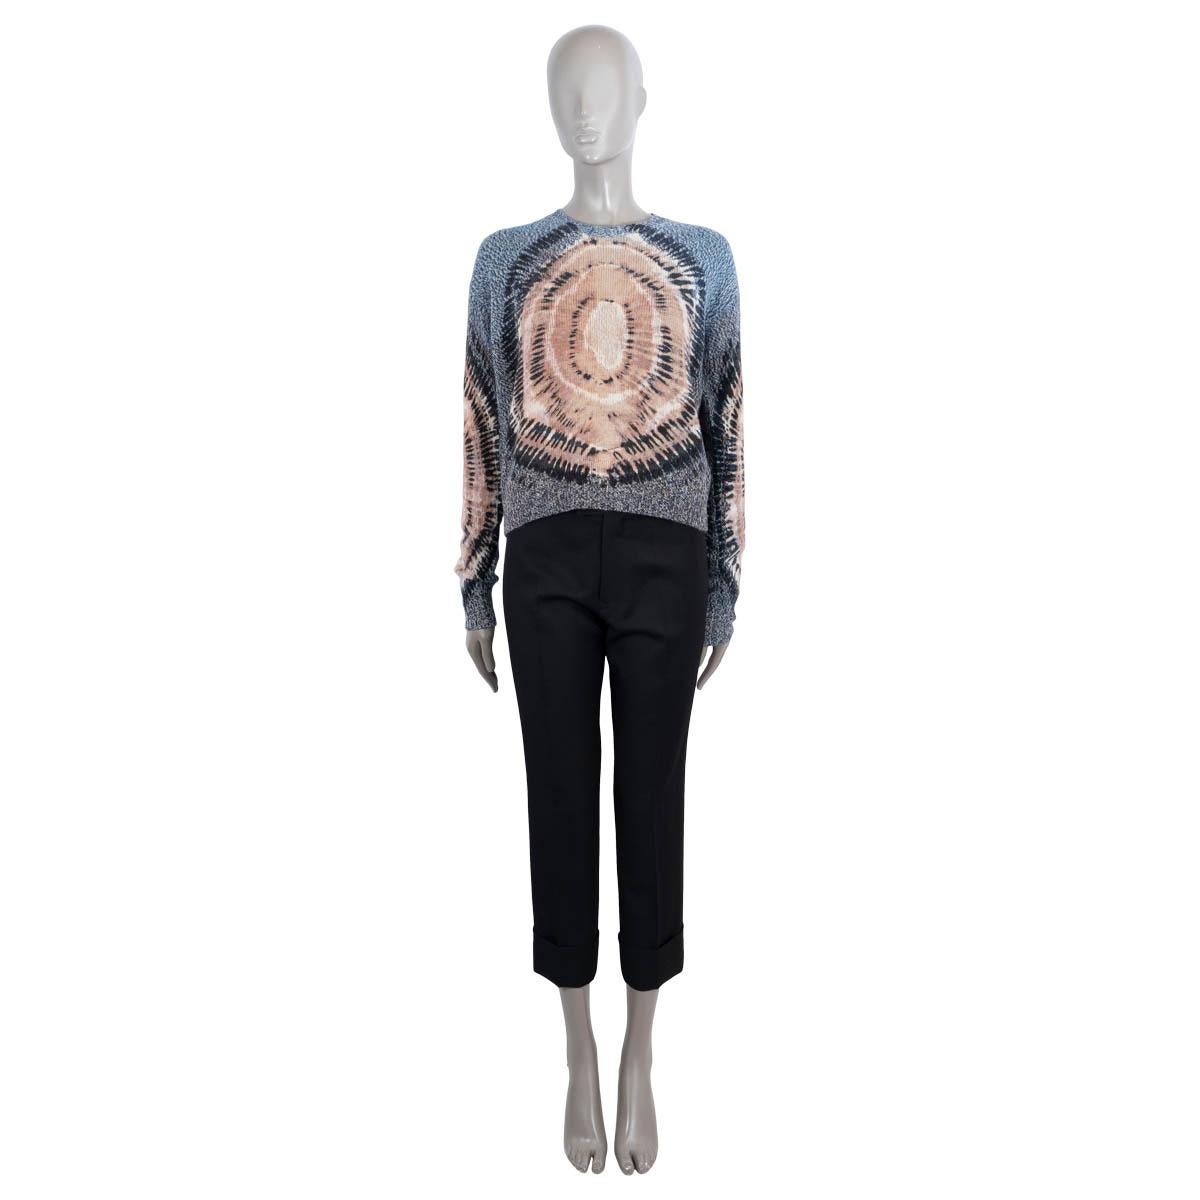 100% authentic Christian Dior tie-dye sweater in navy blue cashmere (100%) with details in black, beige and pale pink. Features a crewneck and ribbed cuffs and hem. Has been worn and is in excellent condition.

2021